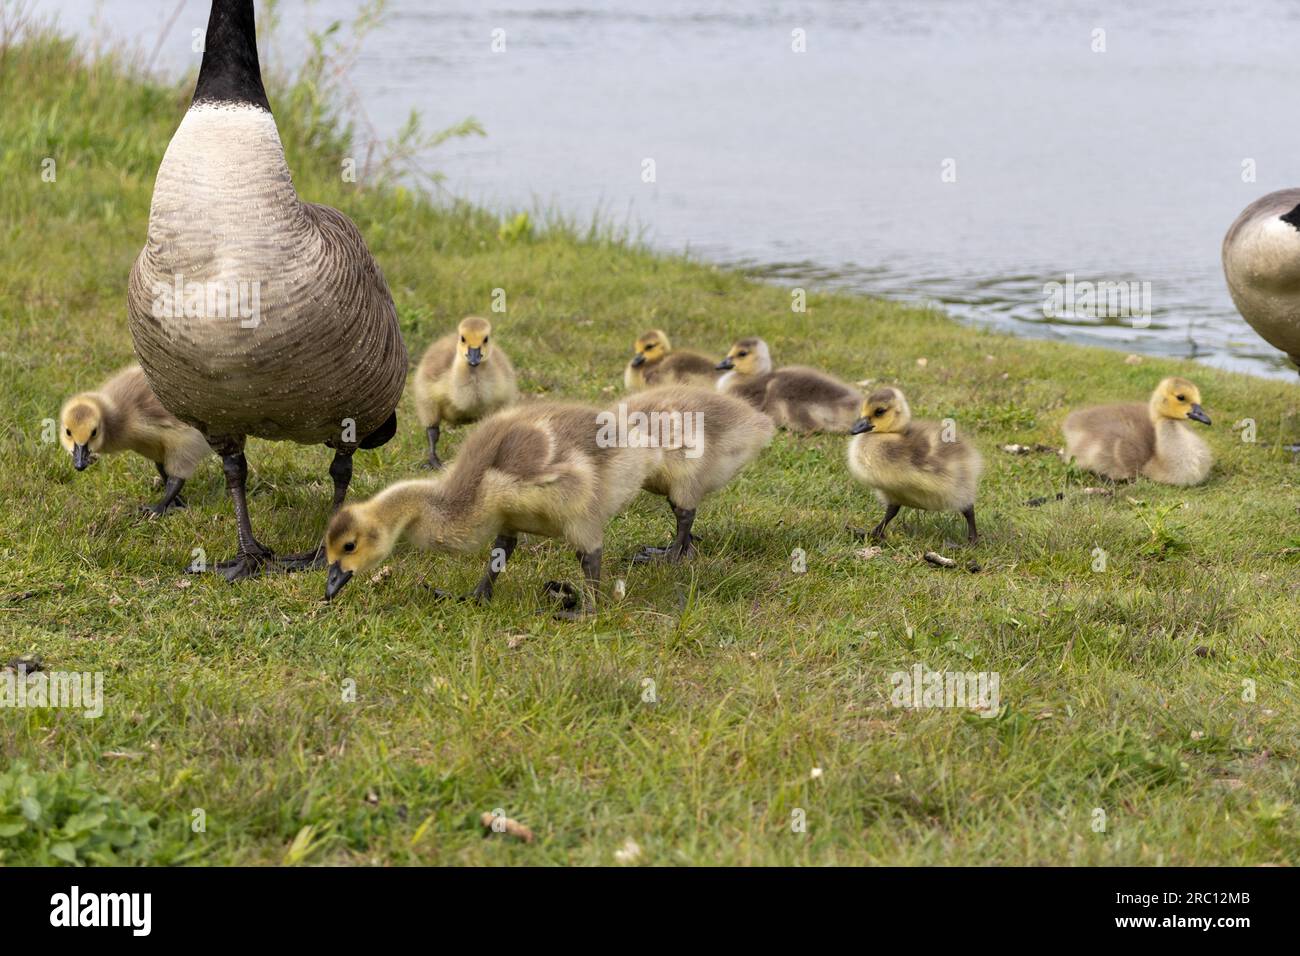 Baby geese flock - geese eating - cute canadian geese - tiny cute baby geese - water background. Taken in Toronto, Canada. Stock Photo